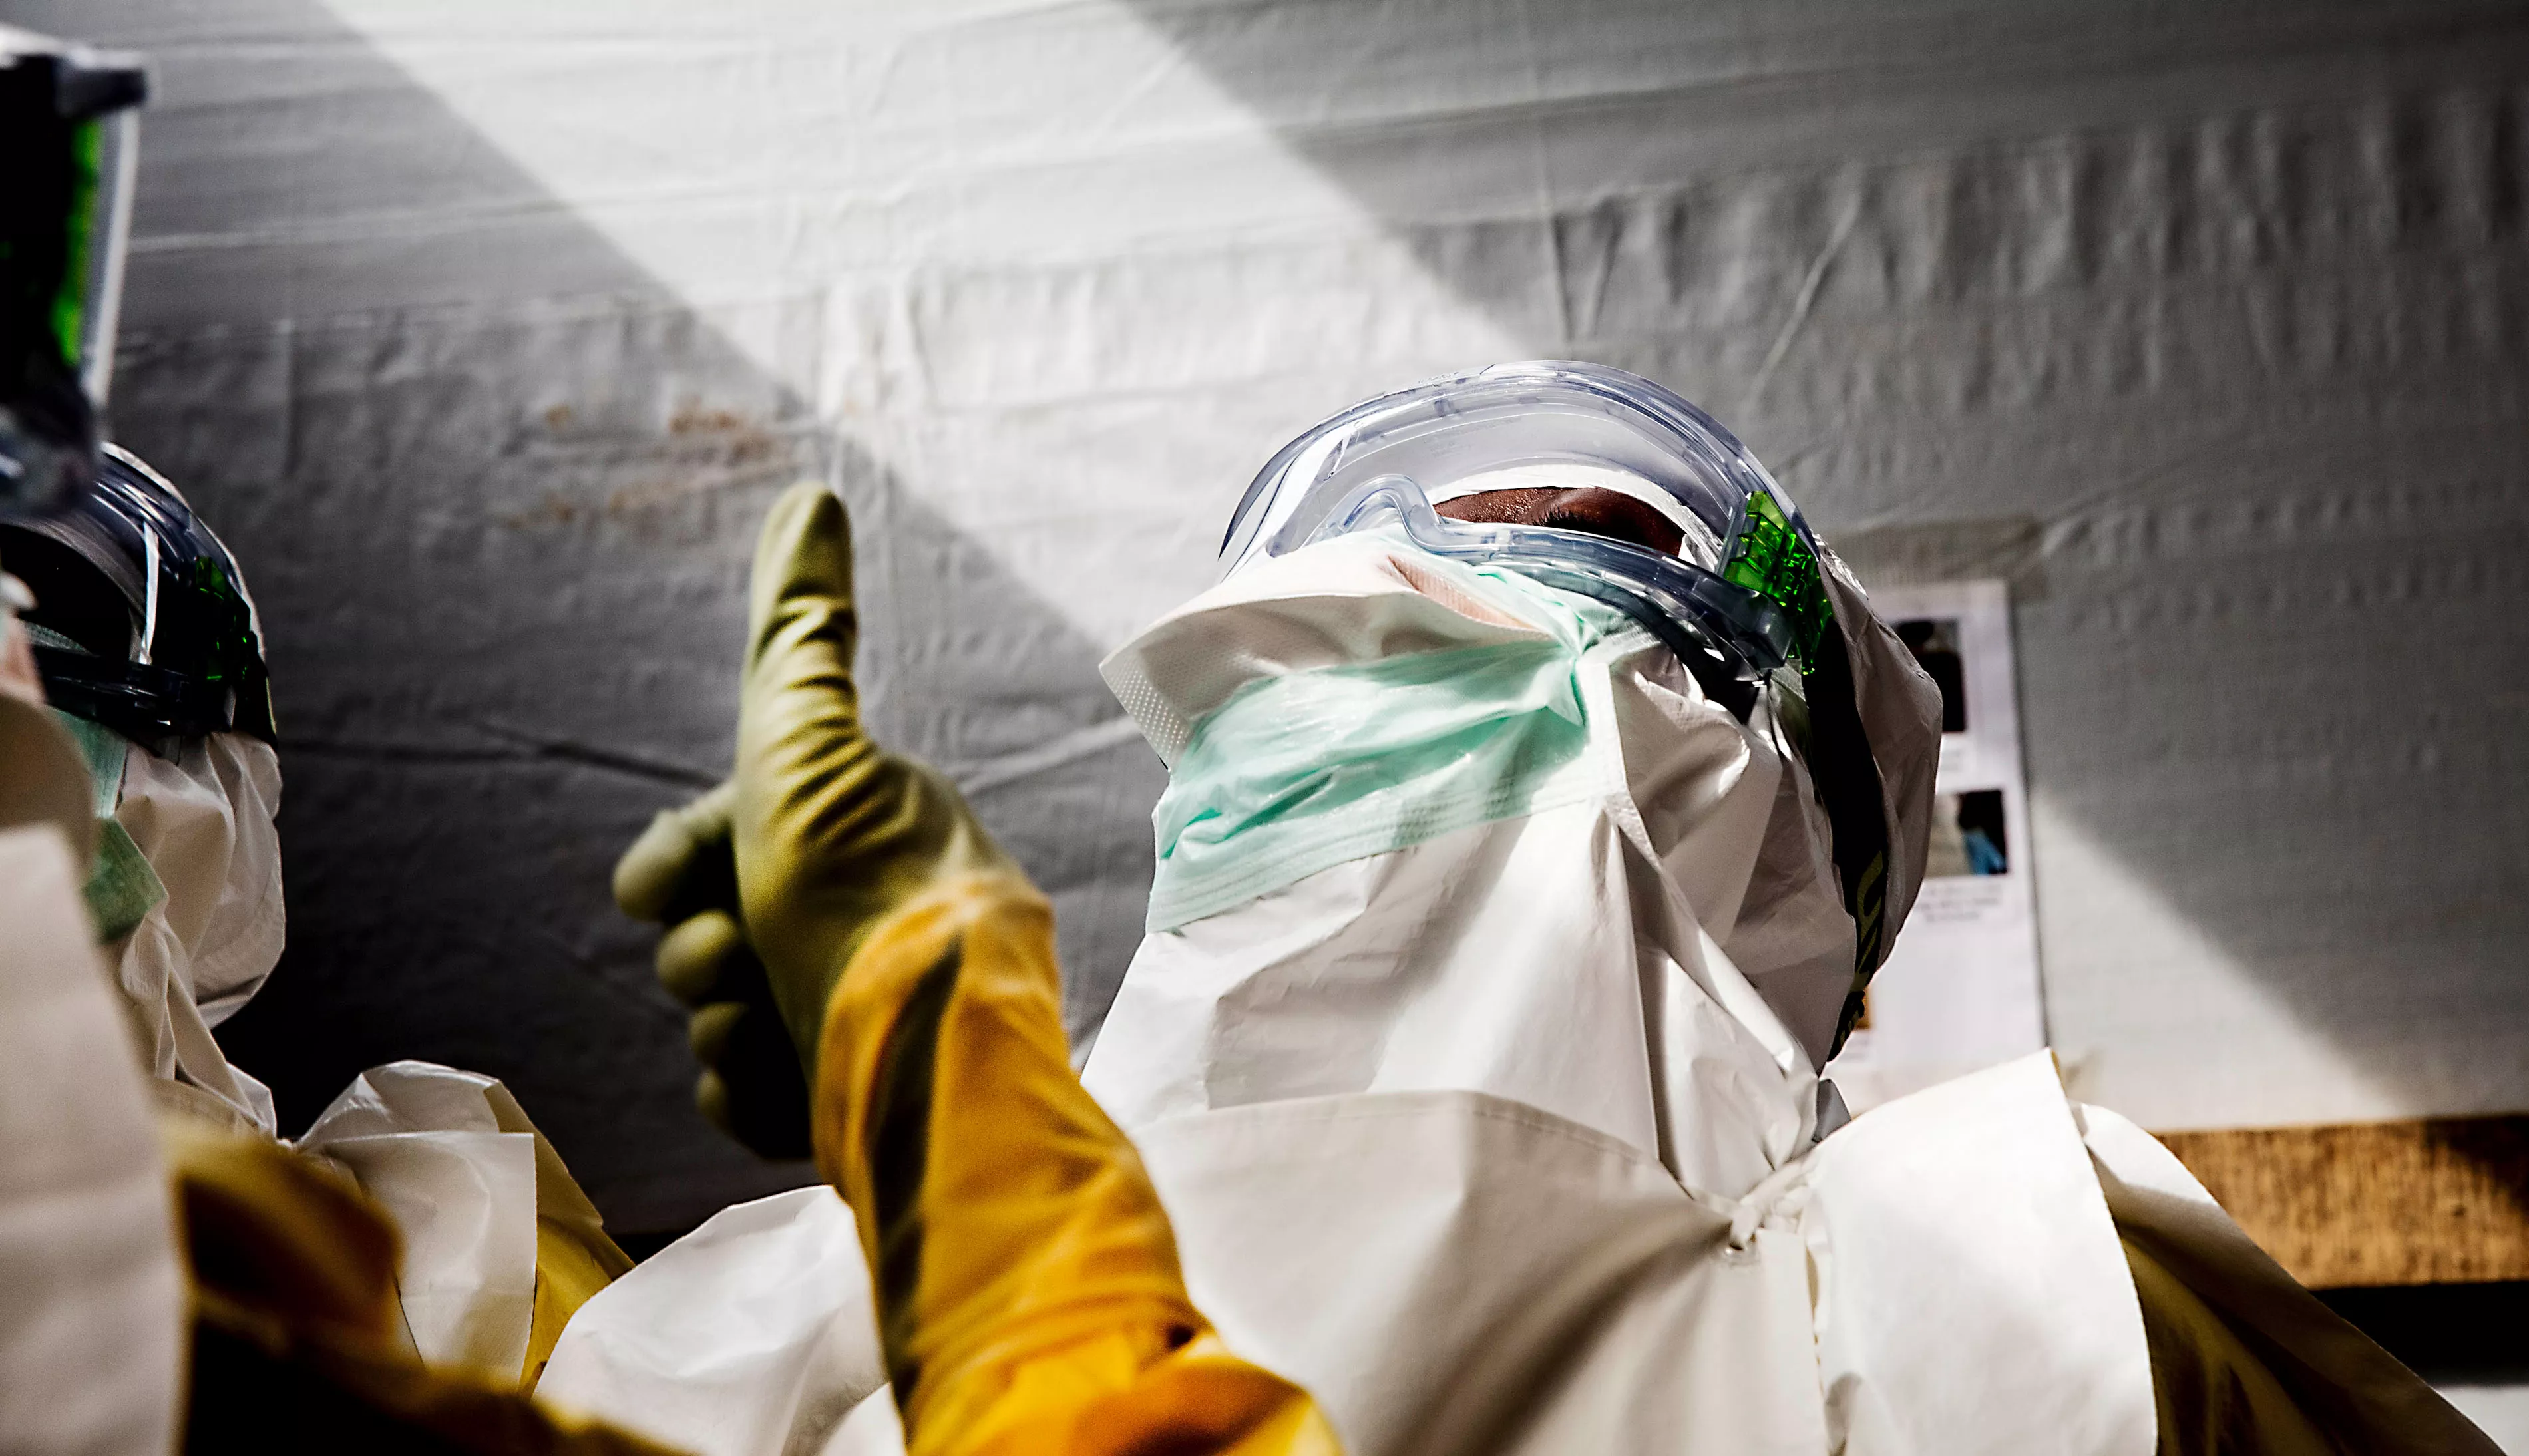 Nurses check each other's PPE as the prepare to enter the high-risk zone in MSF's Ebola treatment center in Sierra Leone.